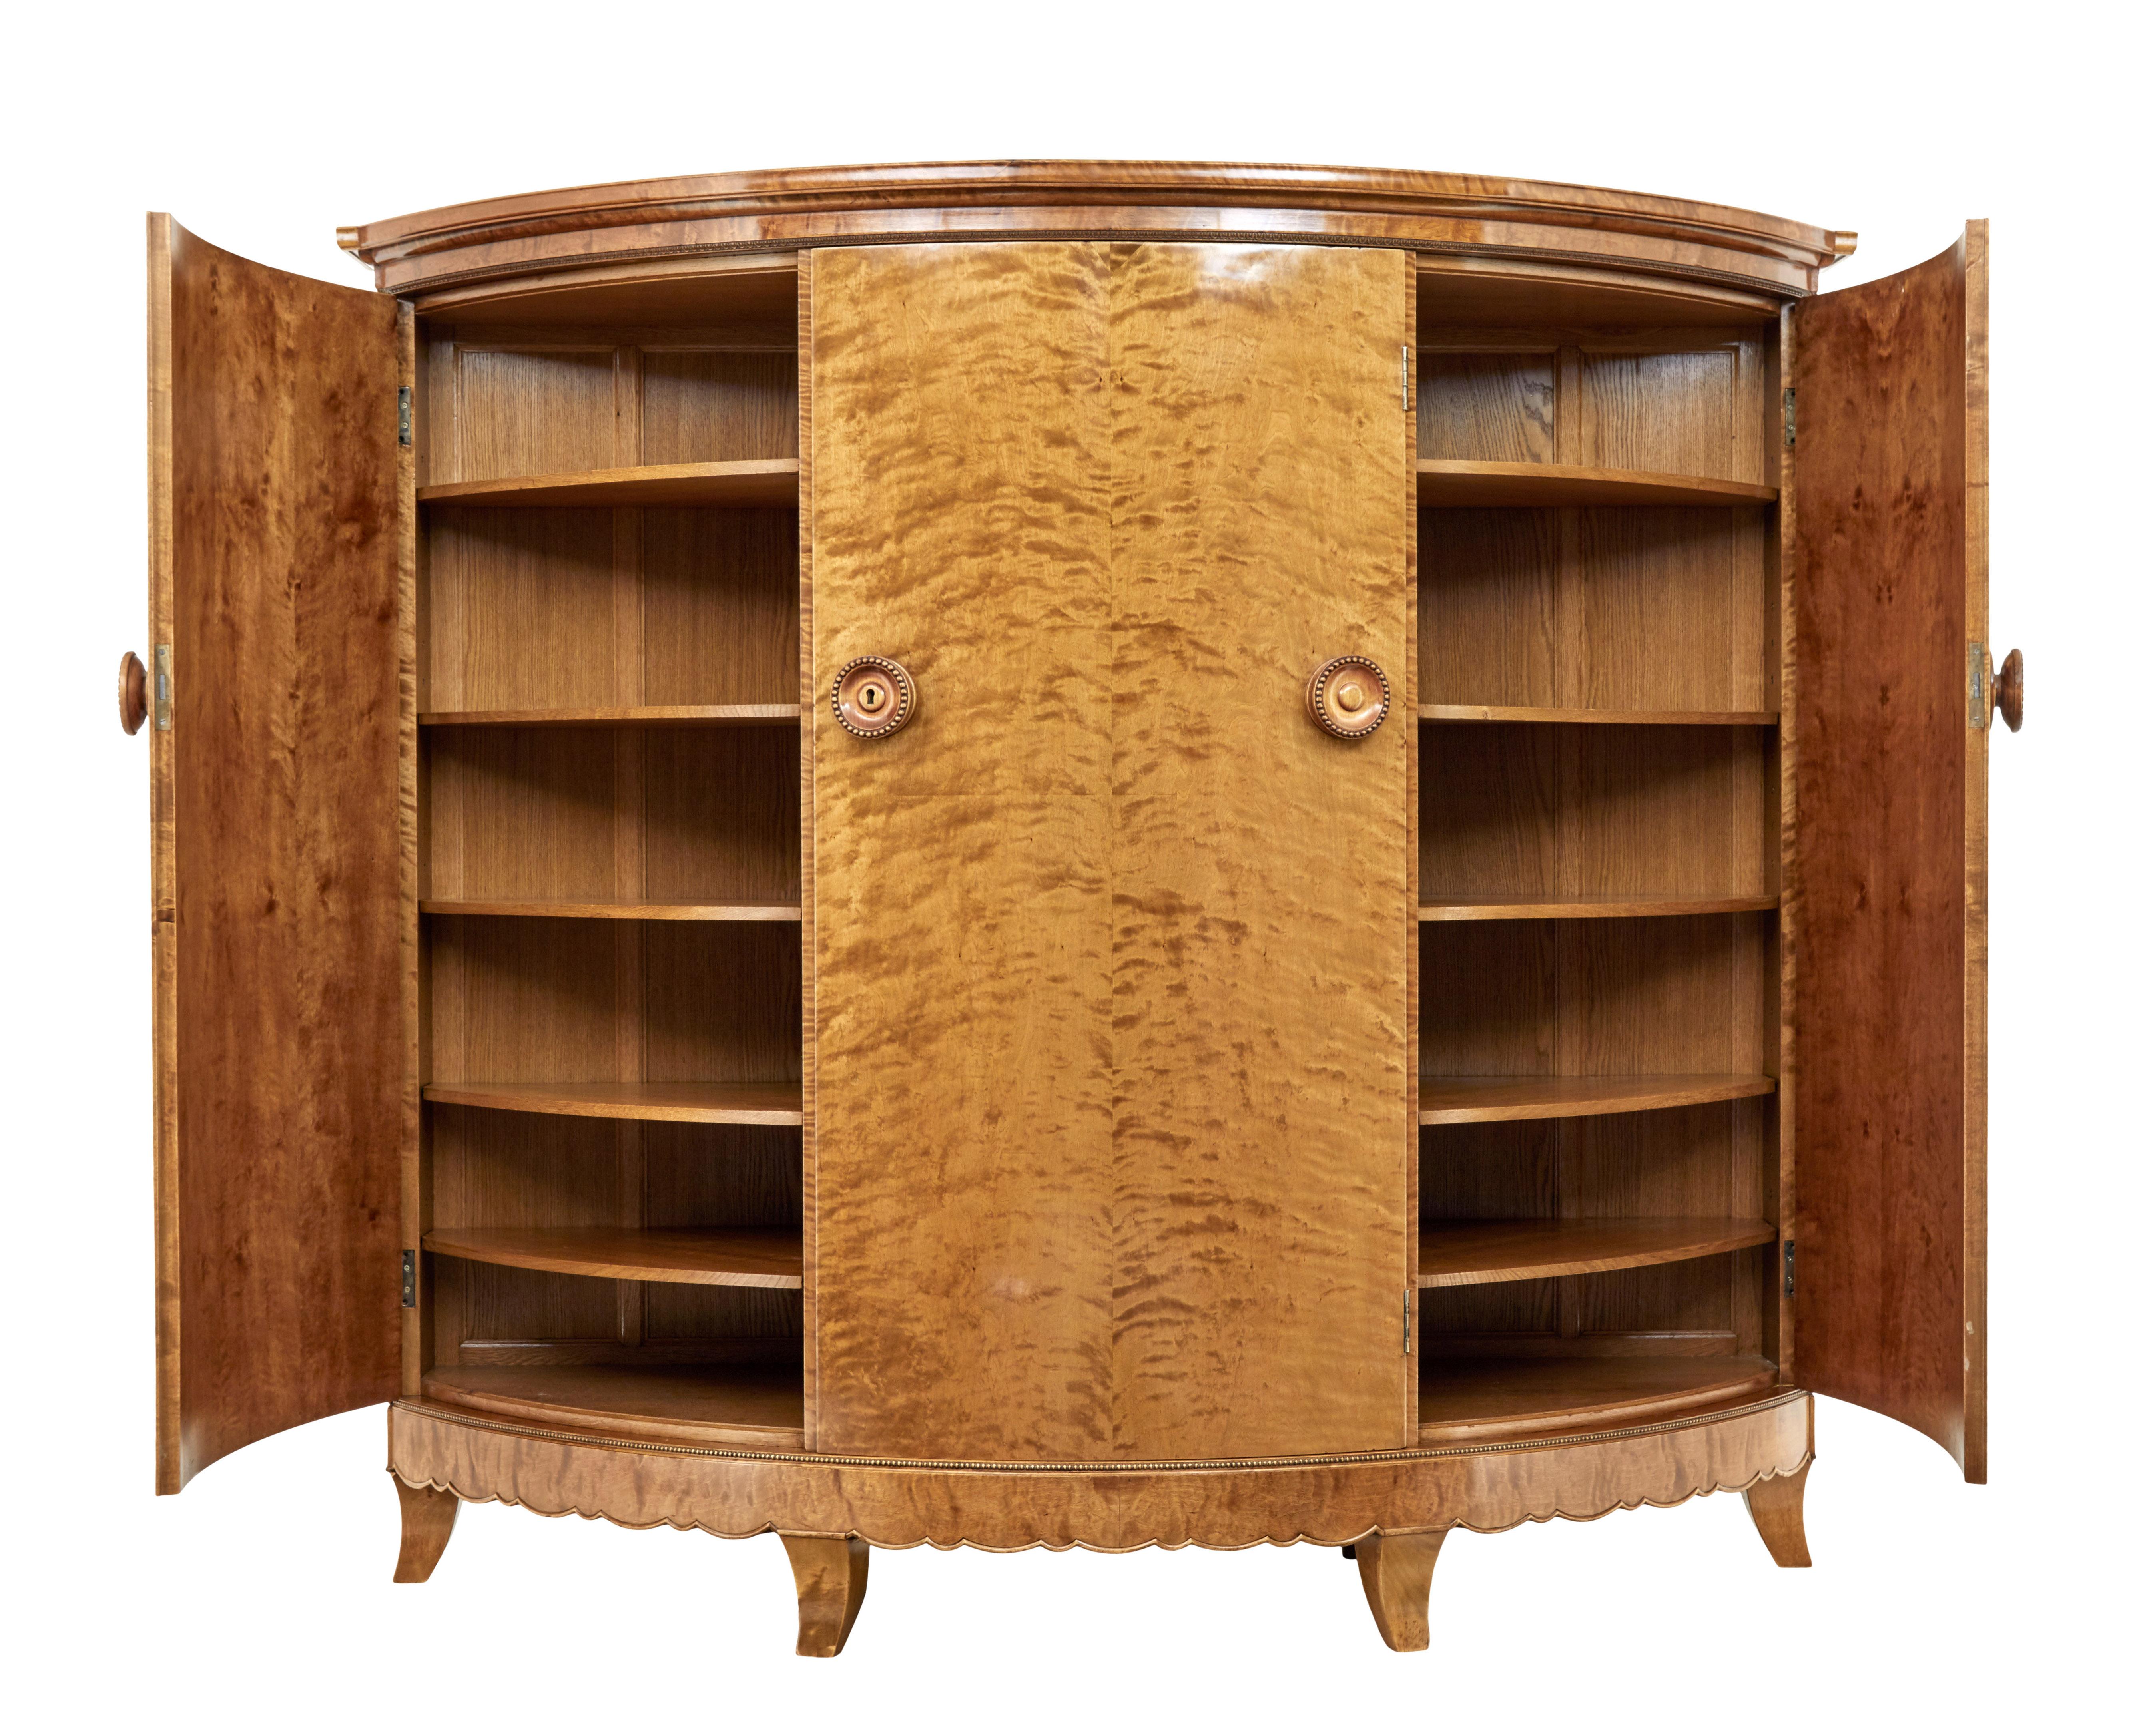 Rare 1930s birch cabinet of grand proportions Otto Schulz for Boet.

We are pleased to offer this piece designed by German designer Otto Schulz for Swedish company Boet. This piece is certainly a special commission as Boet tended to be known for